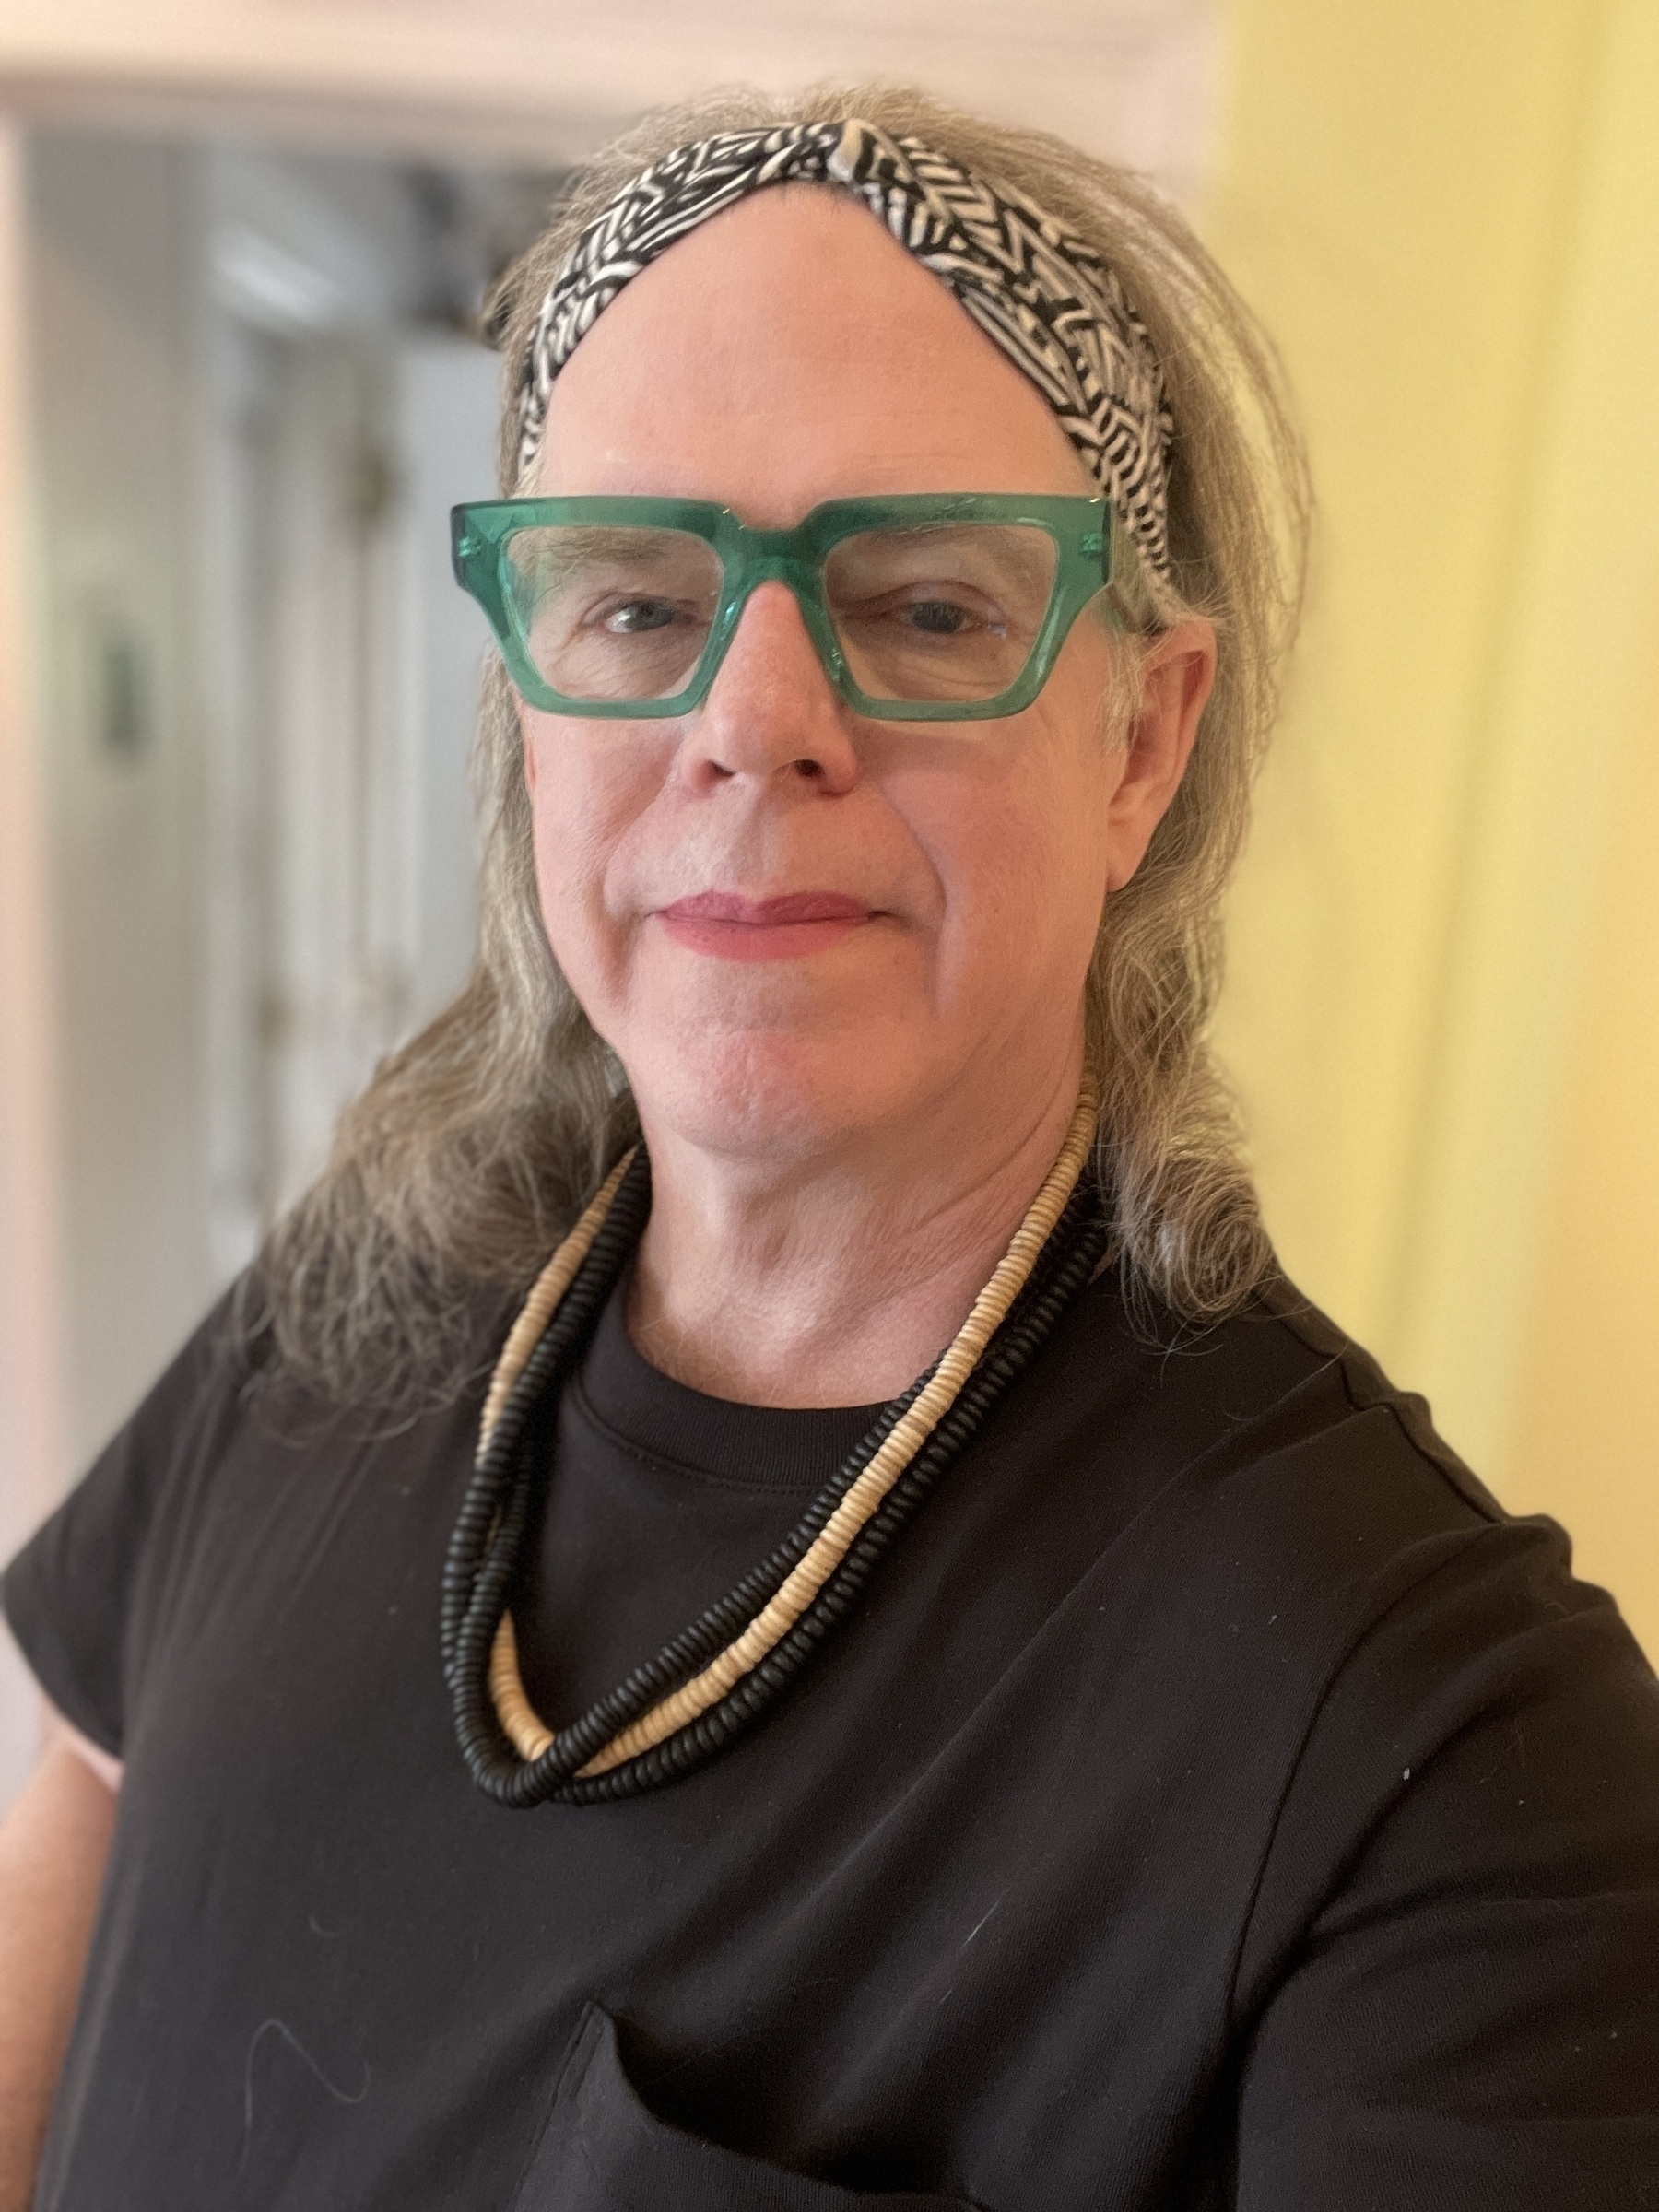 Trans feminine person with wood bead necklace, black cotton top, bold green crystal frame glasses, black and white batik headband, hair cascading in curls to her shoulders and red/pink lipstick. 